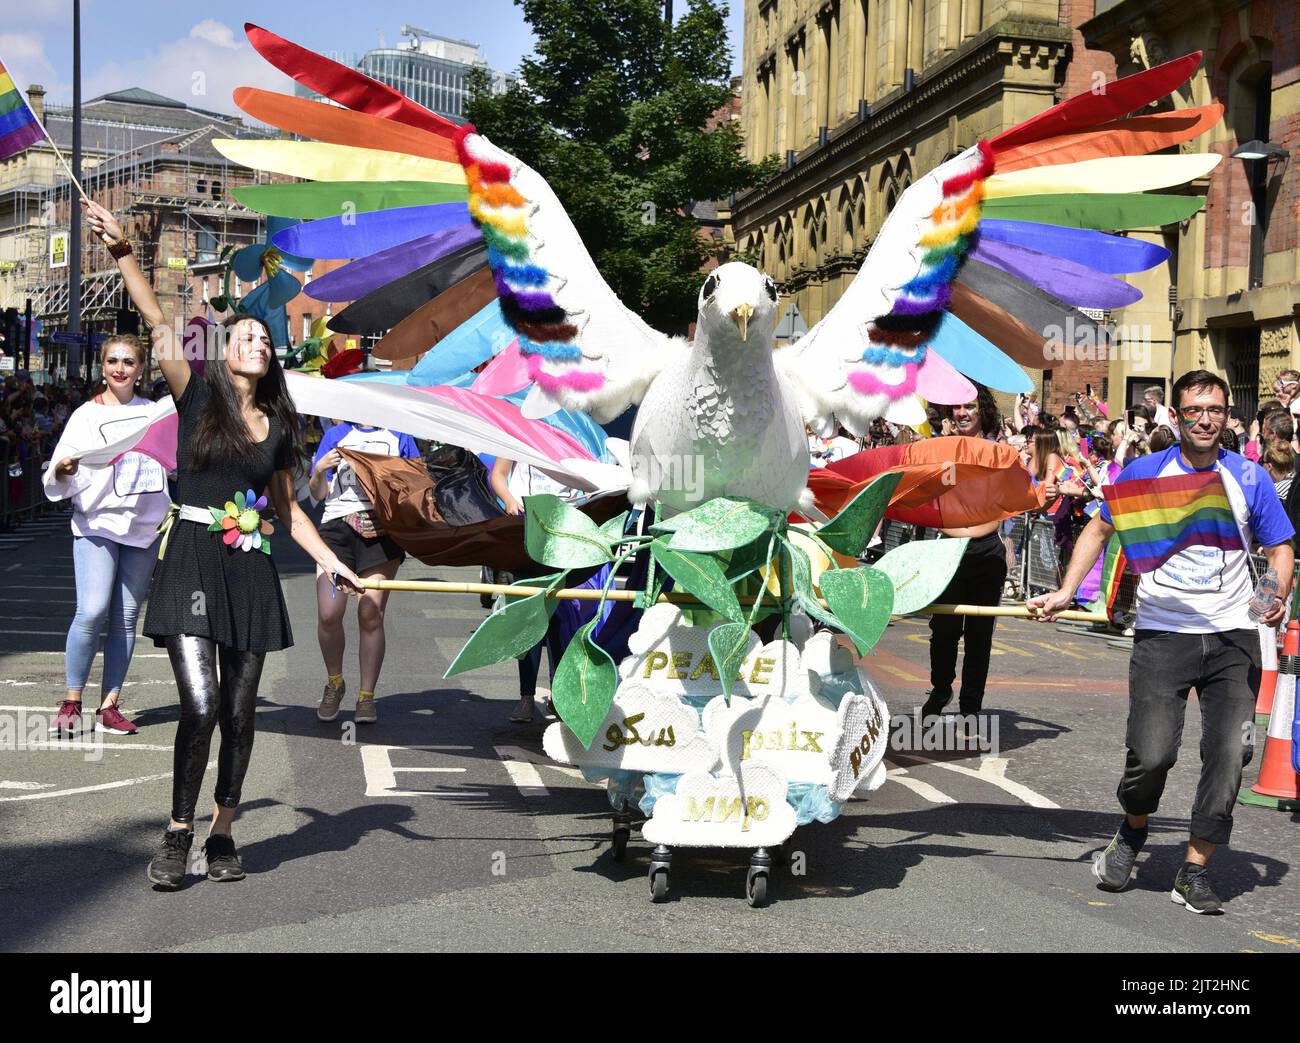 Manchester, UK. 27th August, 2022. A peace float with rainbow and trans flags leads the parade. Participants take part in the LGBTQ+ Pride parade, central Manchester, UK, as LGBTQ+ Pride continues over the Bank Holiday weekend 26th to 29th August. Organisers say: 'Manchester Pride is one of the UK's leading LGBTQ+ charities. Our vision is a world where LGBTQ+ people are free to live and love without prejudice. We’re part of a global Pride movement celebrating LGBTQ+ equality and challenging discrimination.' Credit: Terry Waller/Alamy Live News Stock Photo